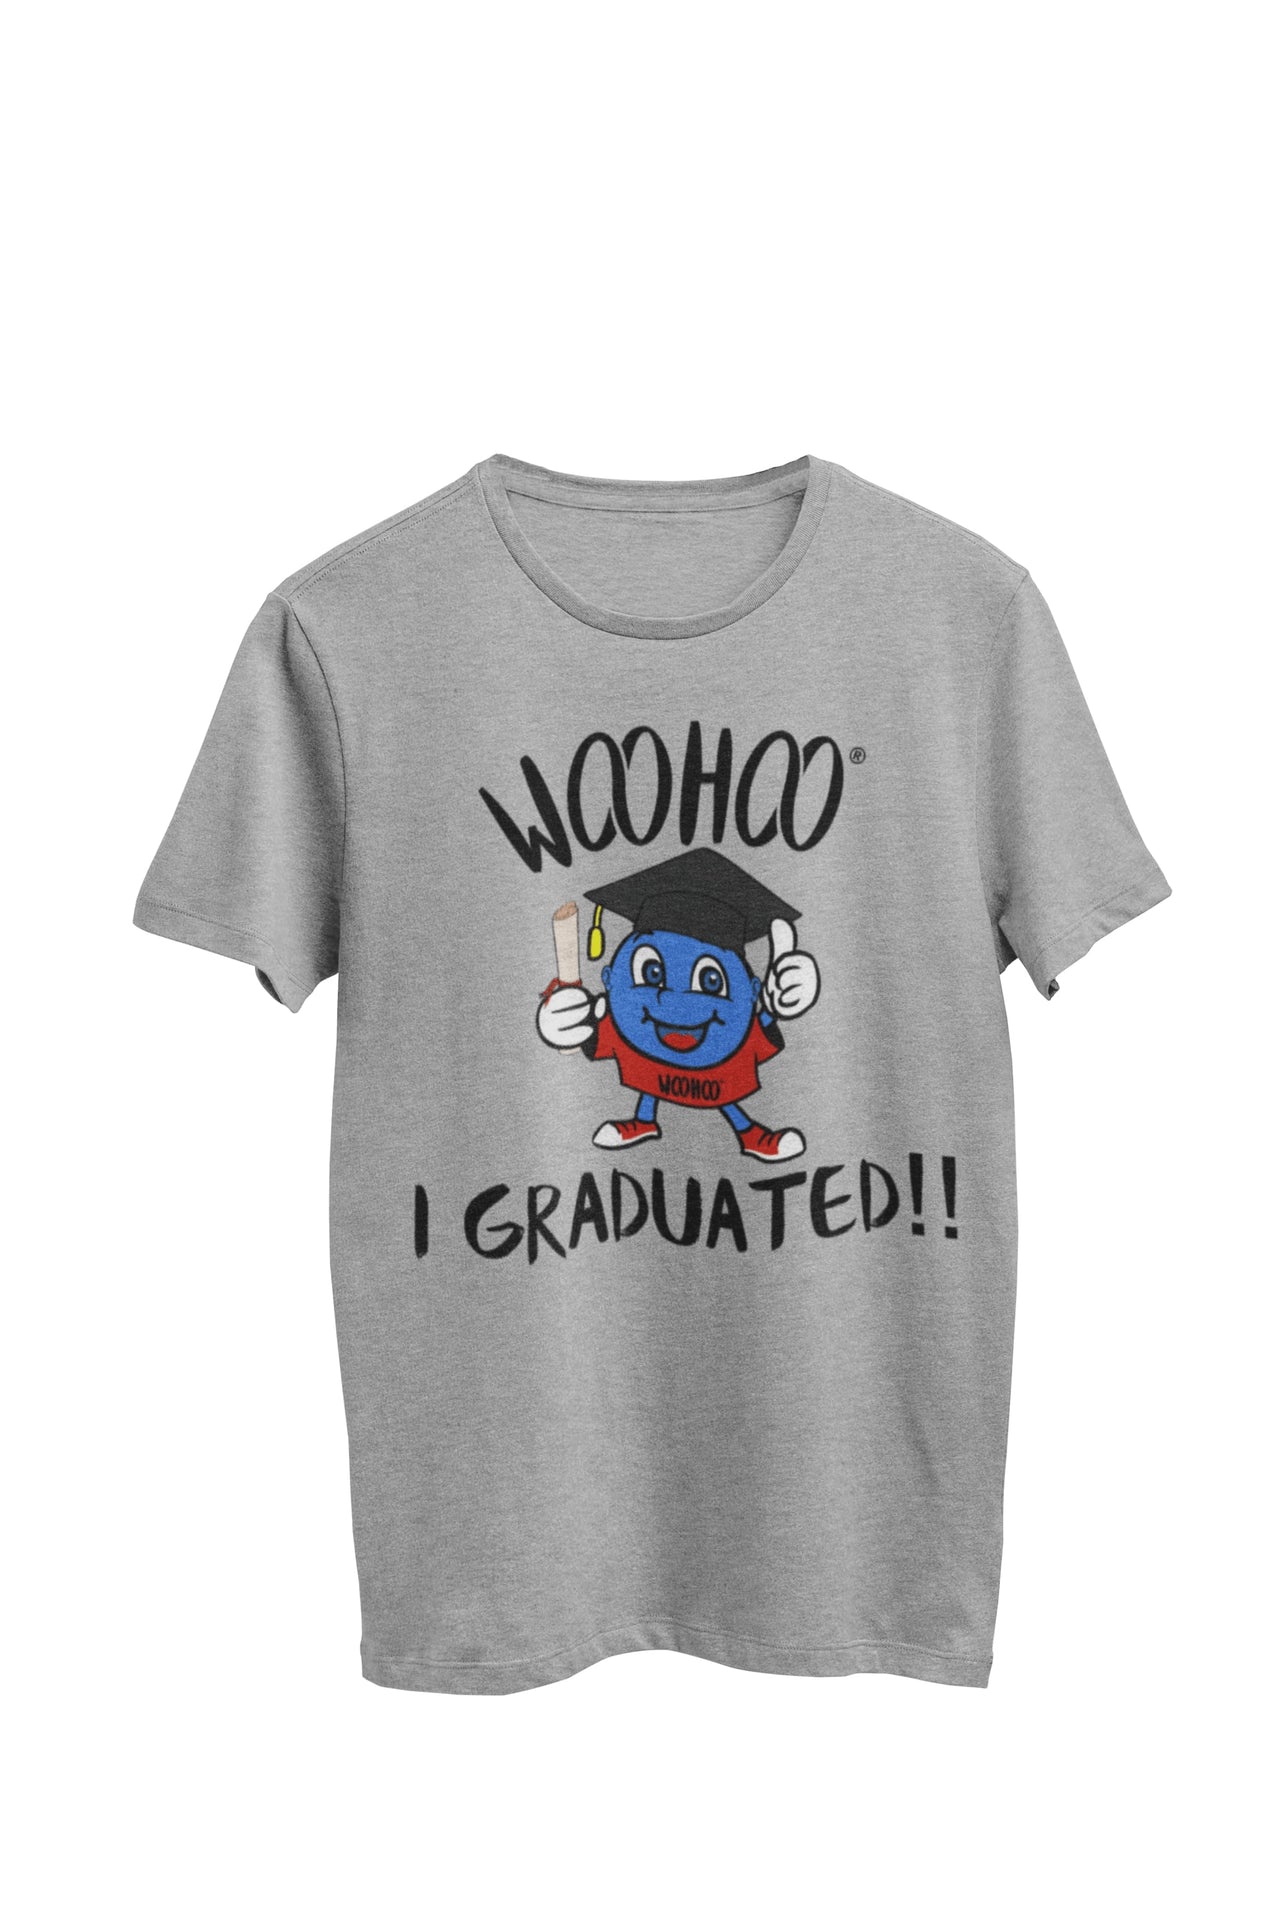 WooHooBerry showcasing the text 'WooHoo I graduated,' accompanied by an illustration of the Woohooberry character donning a cap and gown. The gray T-shirt seamlessly complements the celebratory achievement.